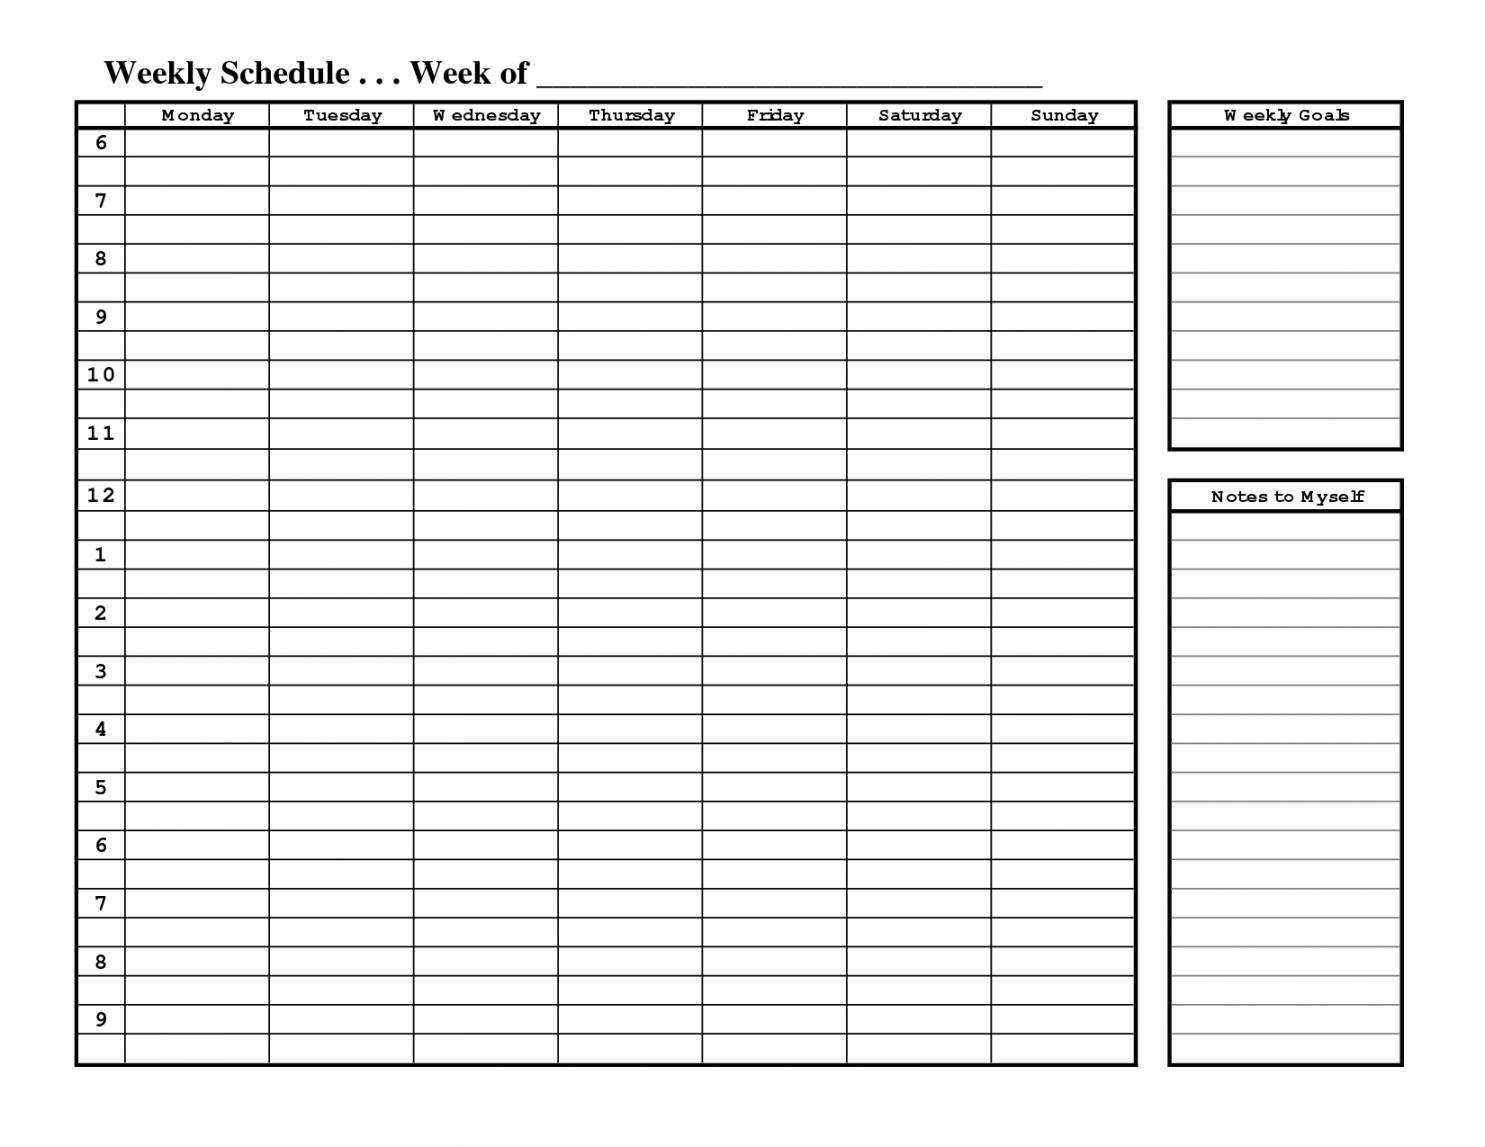 print out scedjols  Printable Weekly Schedules  Daily schedule